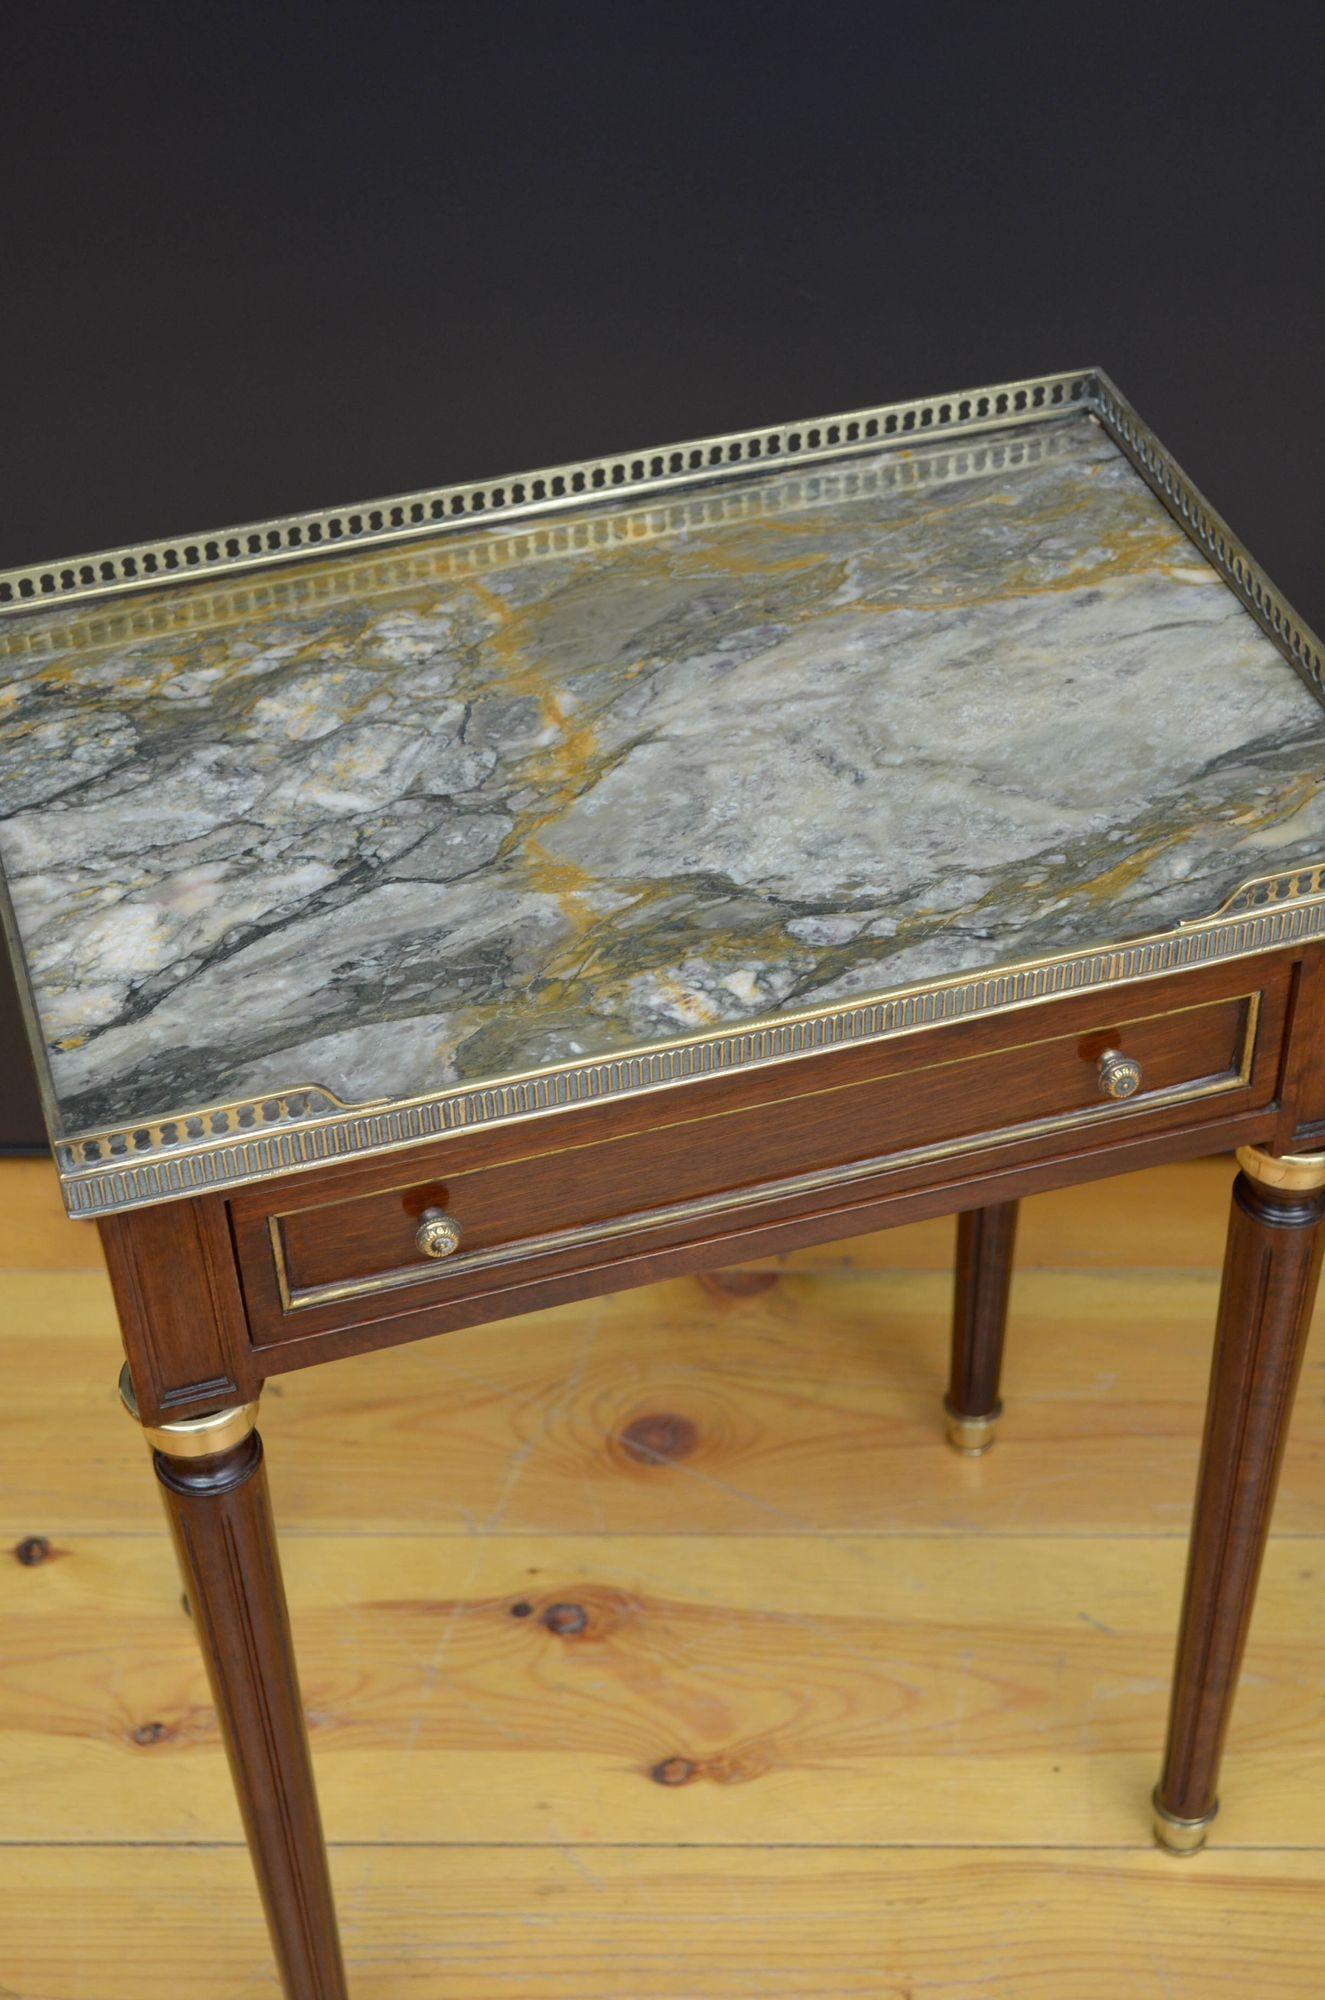 Pair of Decorative Marble Top Tables In Good Condition For Sale In Whaley Bridge, GB